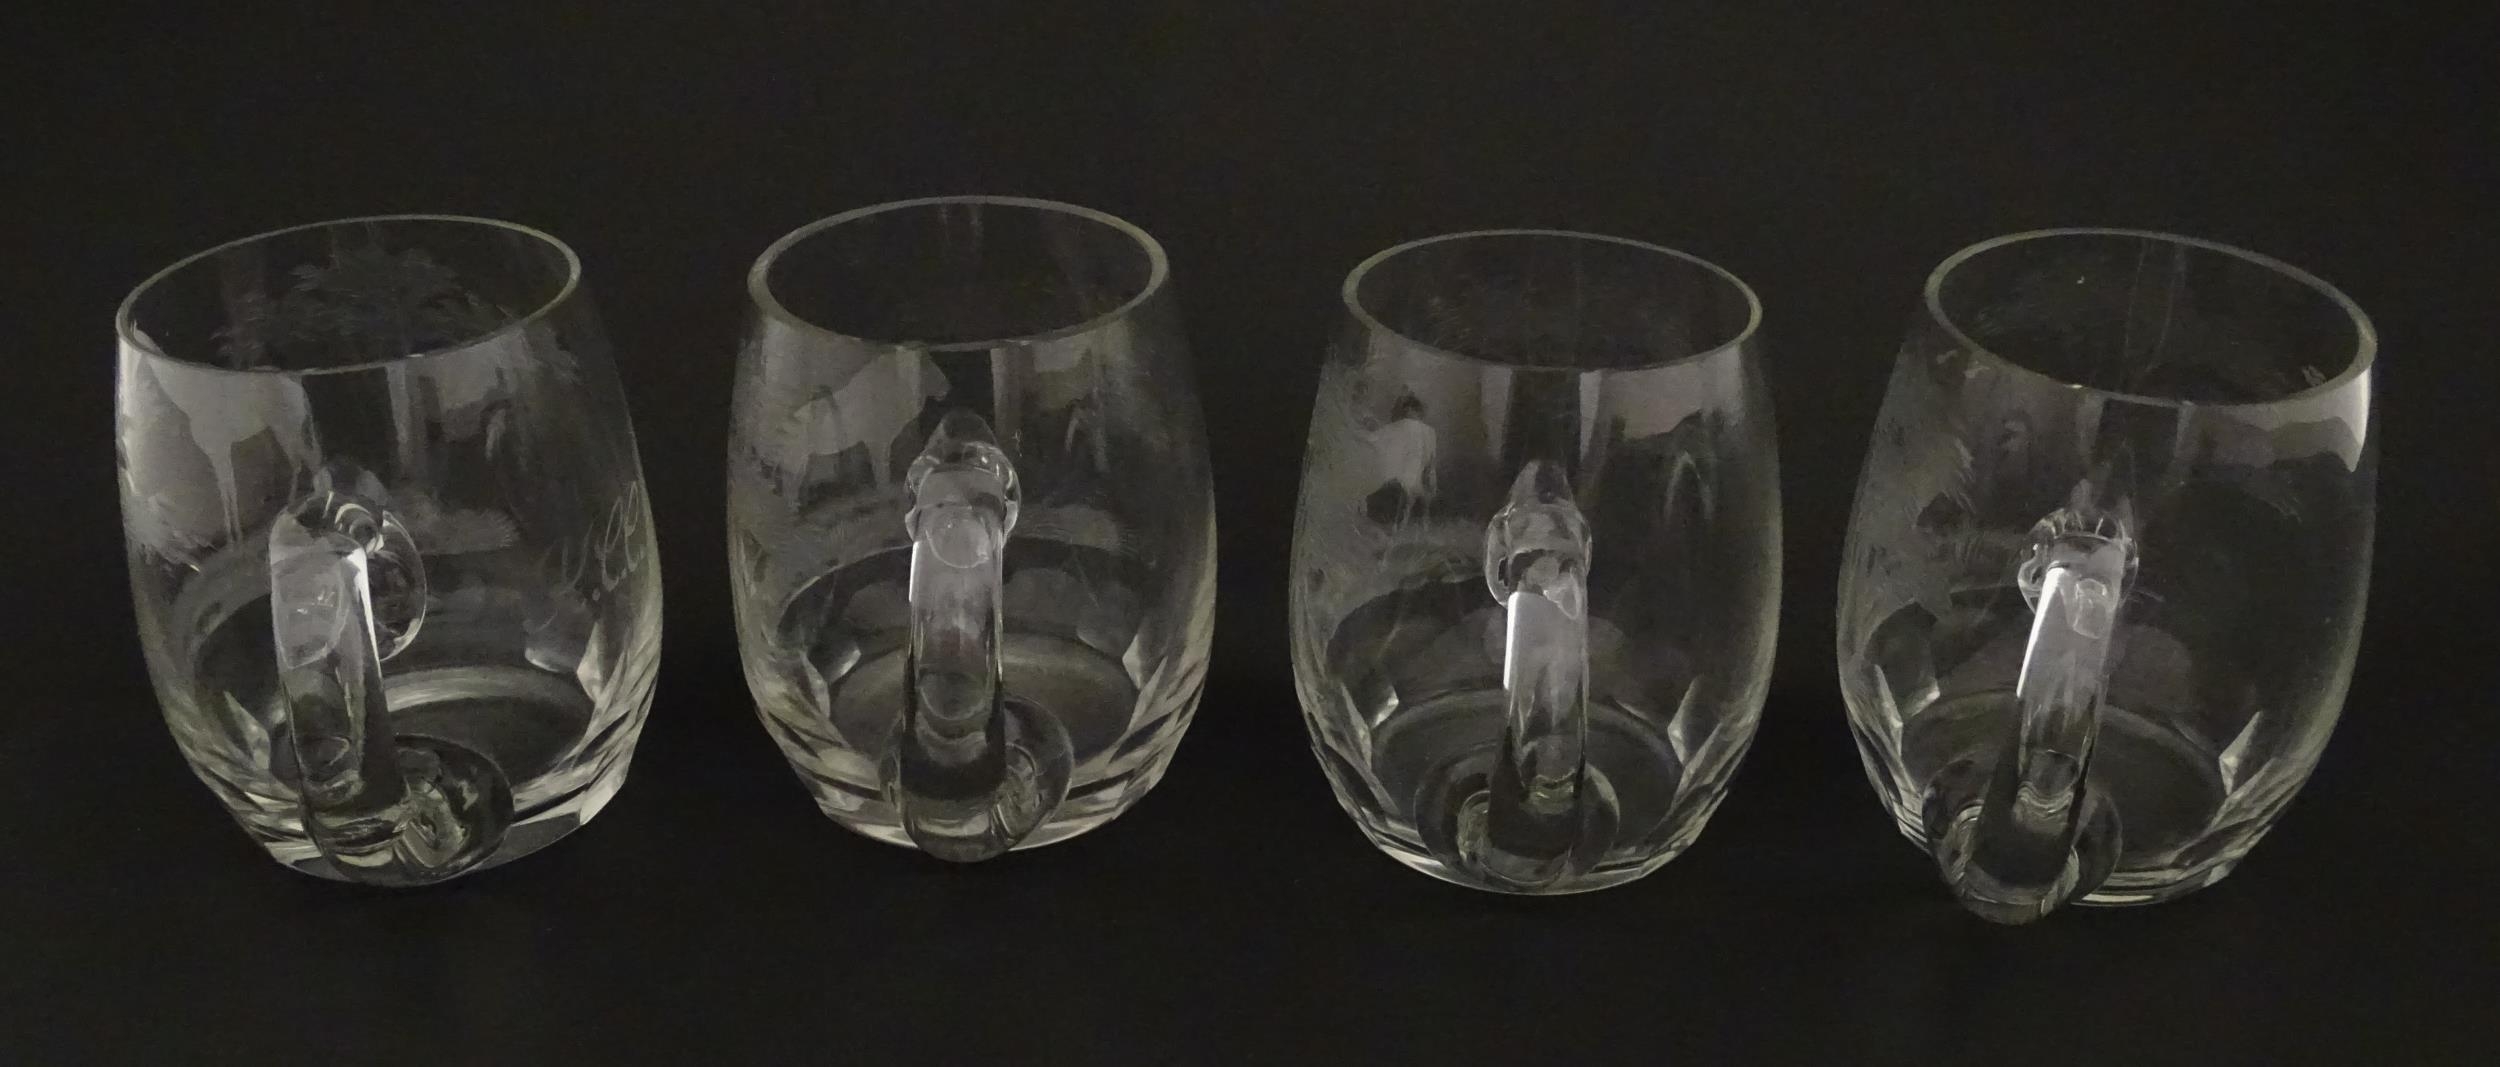 Seven Rowland Ward pint mugs / glasses with engraved Safari animal detail. Unsigned. Approx. 4 1/ - Image 13 of 26